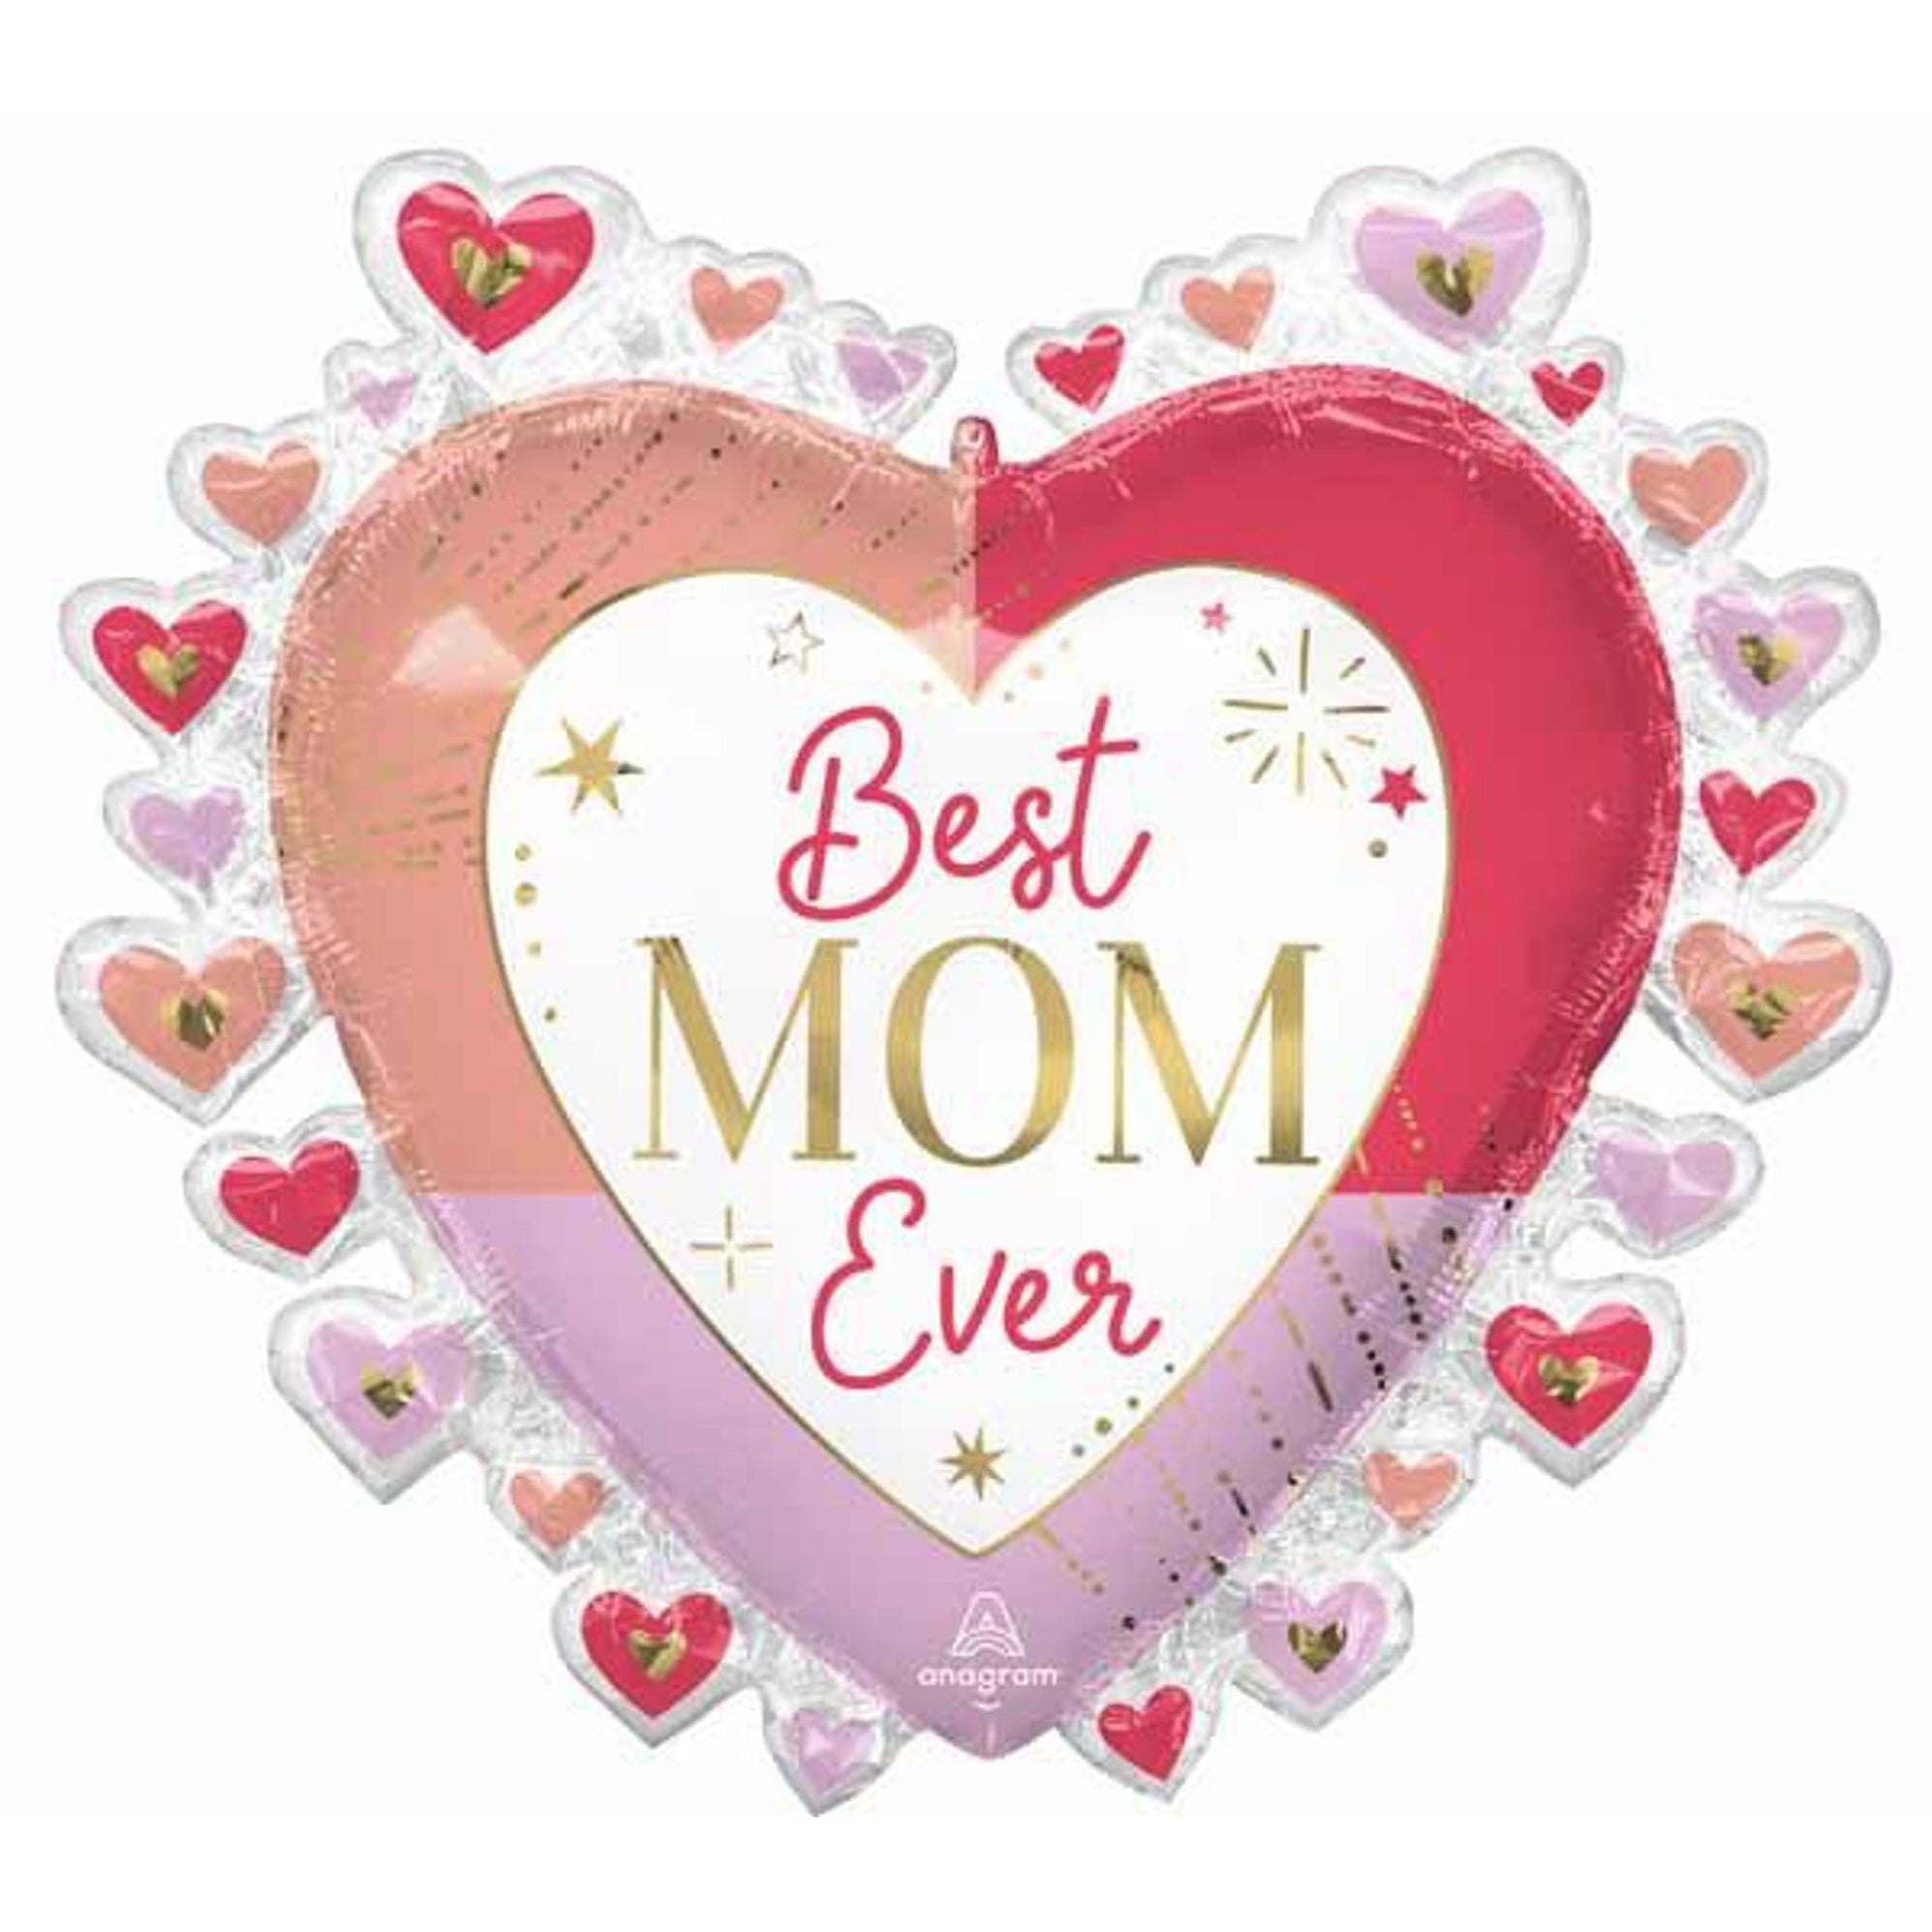 "Best Mom Ever" 29" Heart-Shaped Foil Balloon Package